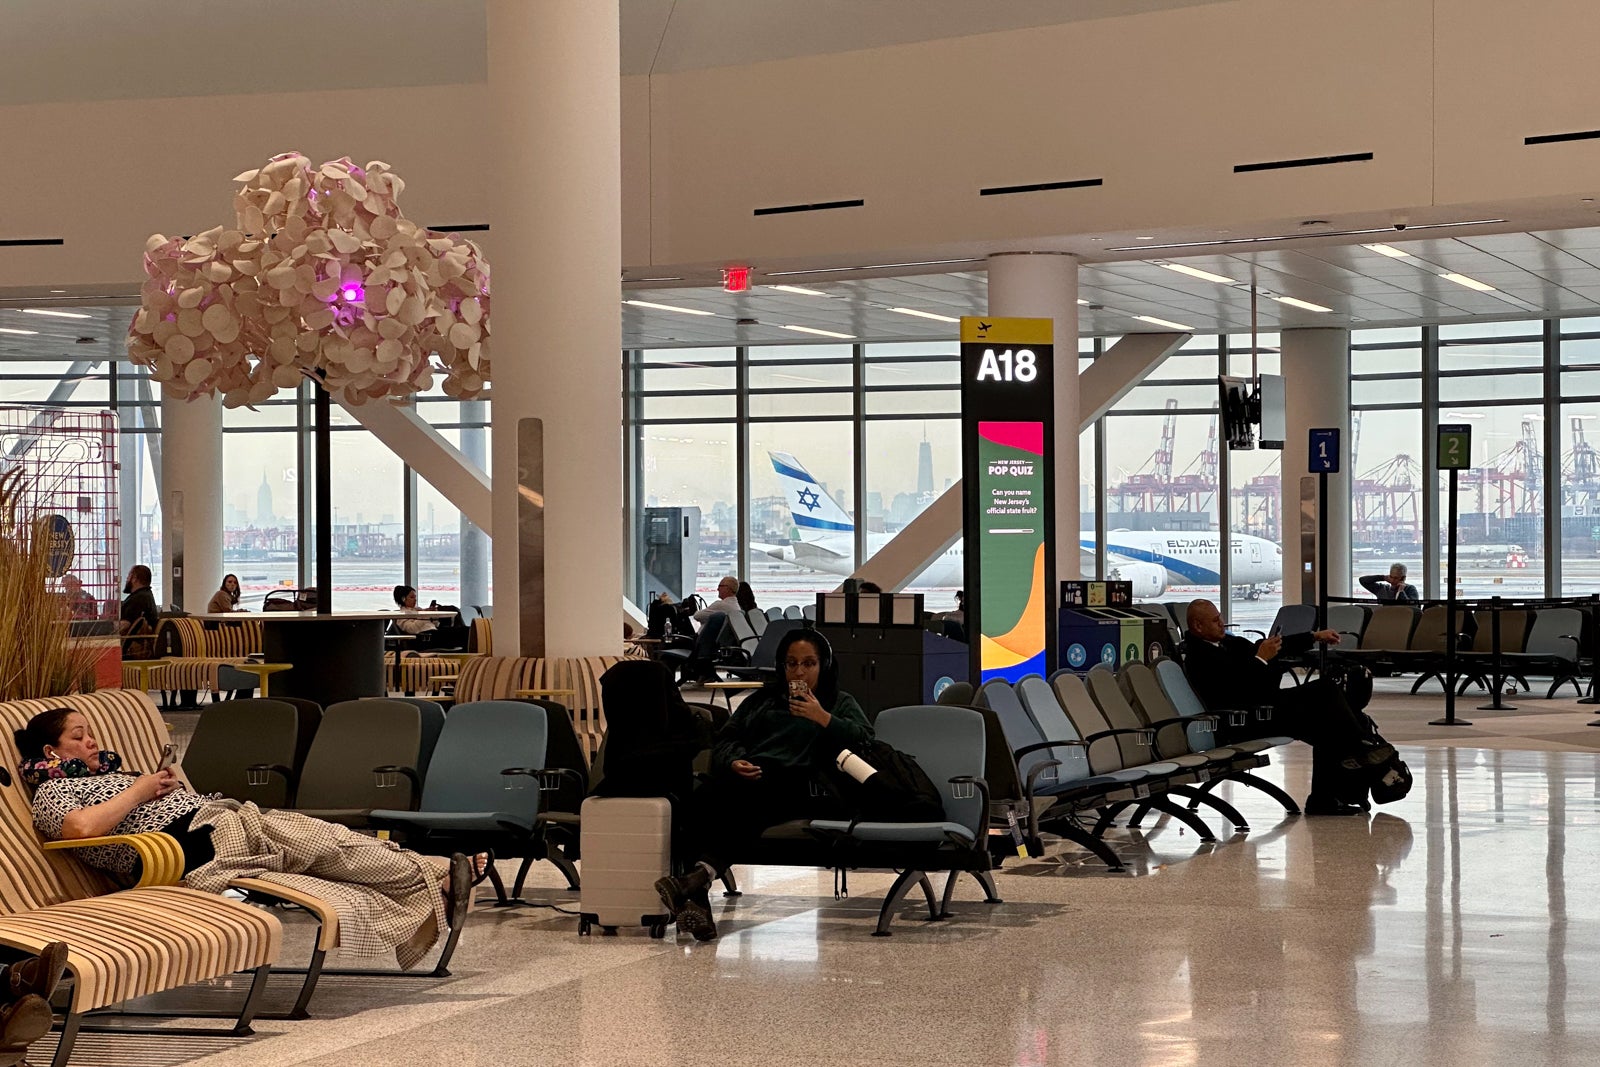 Newark's stunning new Terminal A opens in just 1 week - The Points Guy